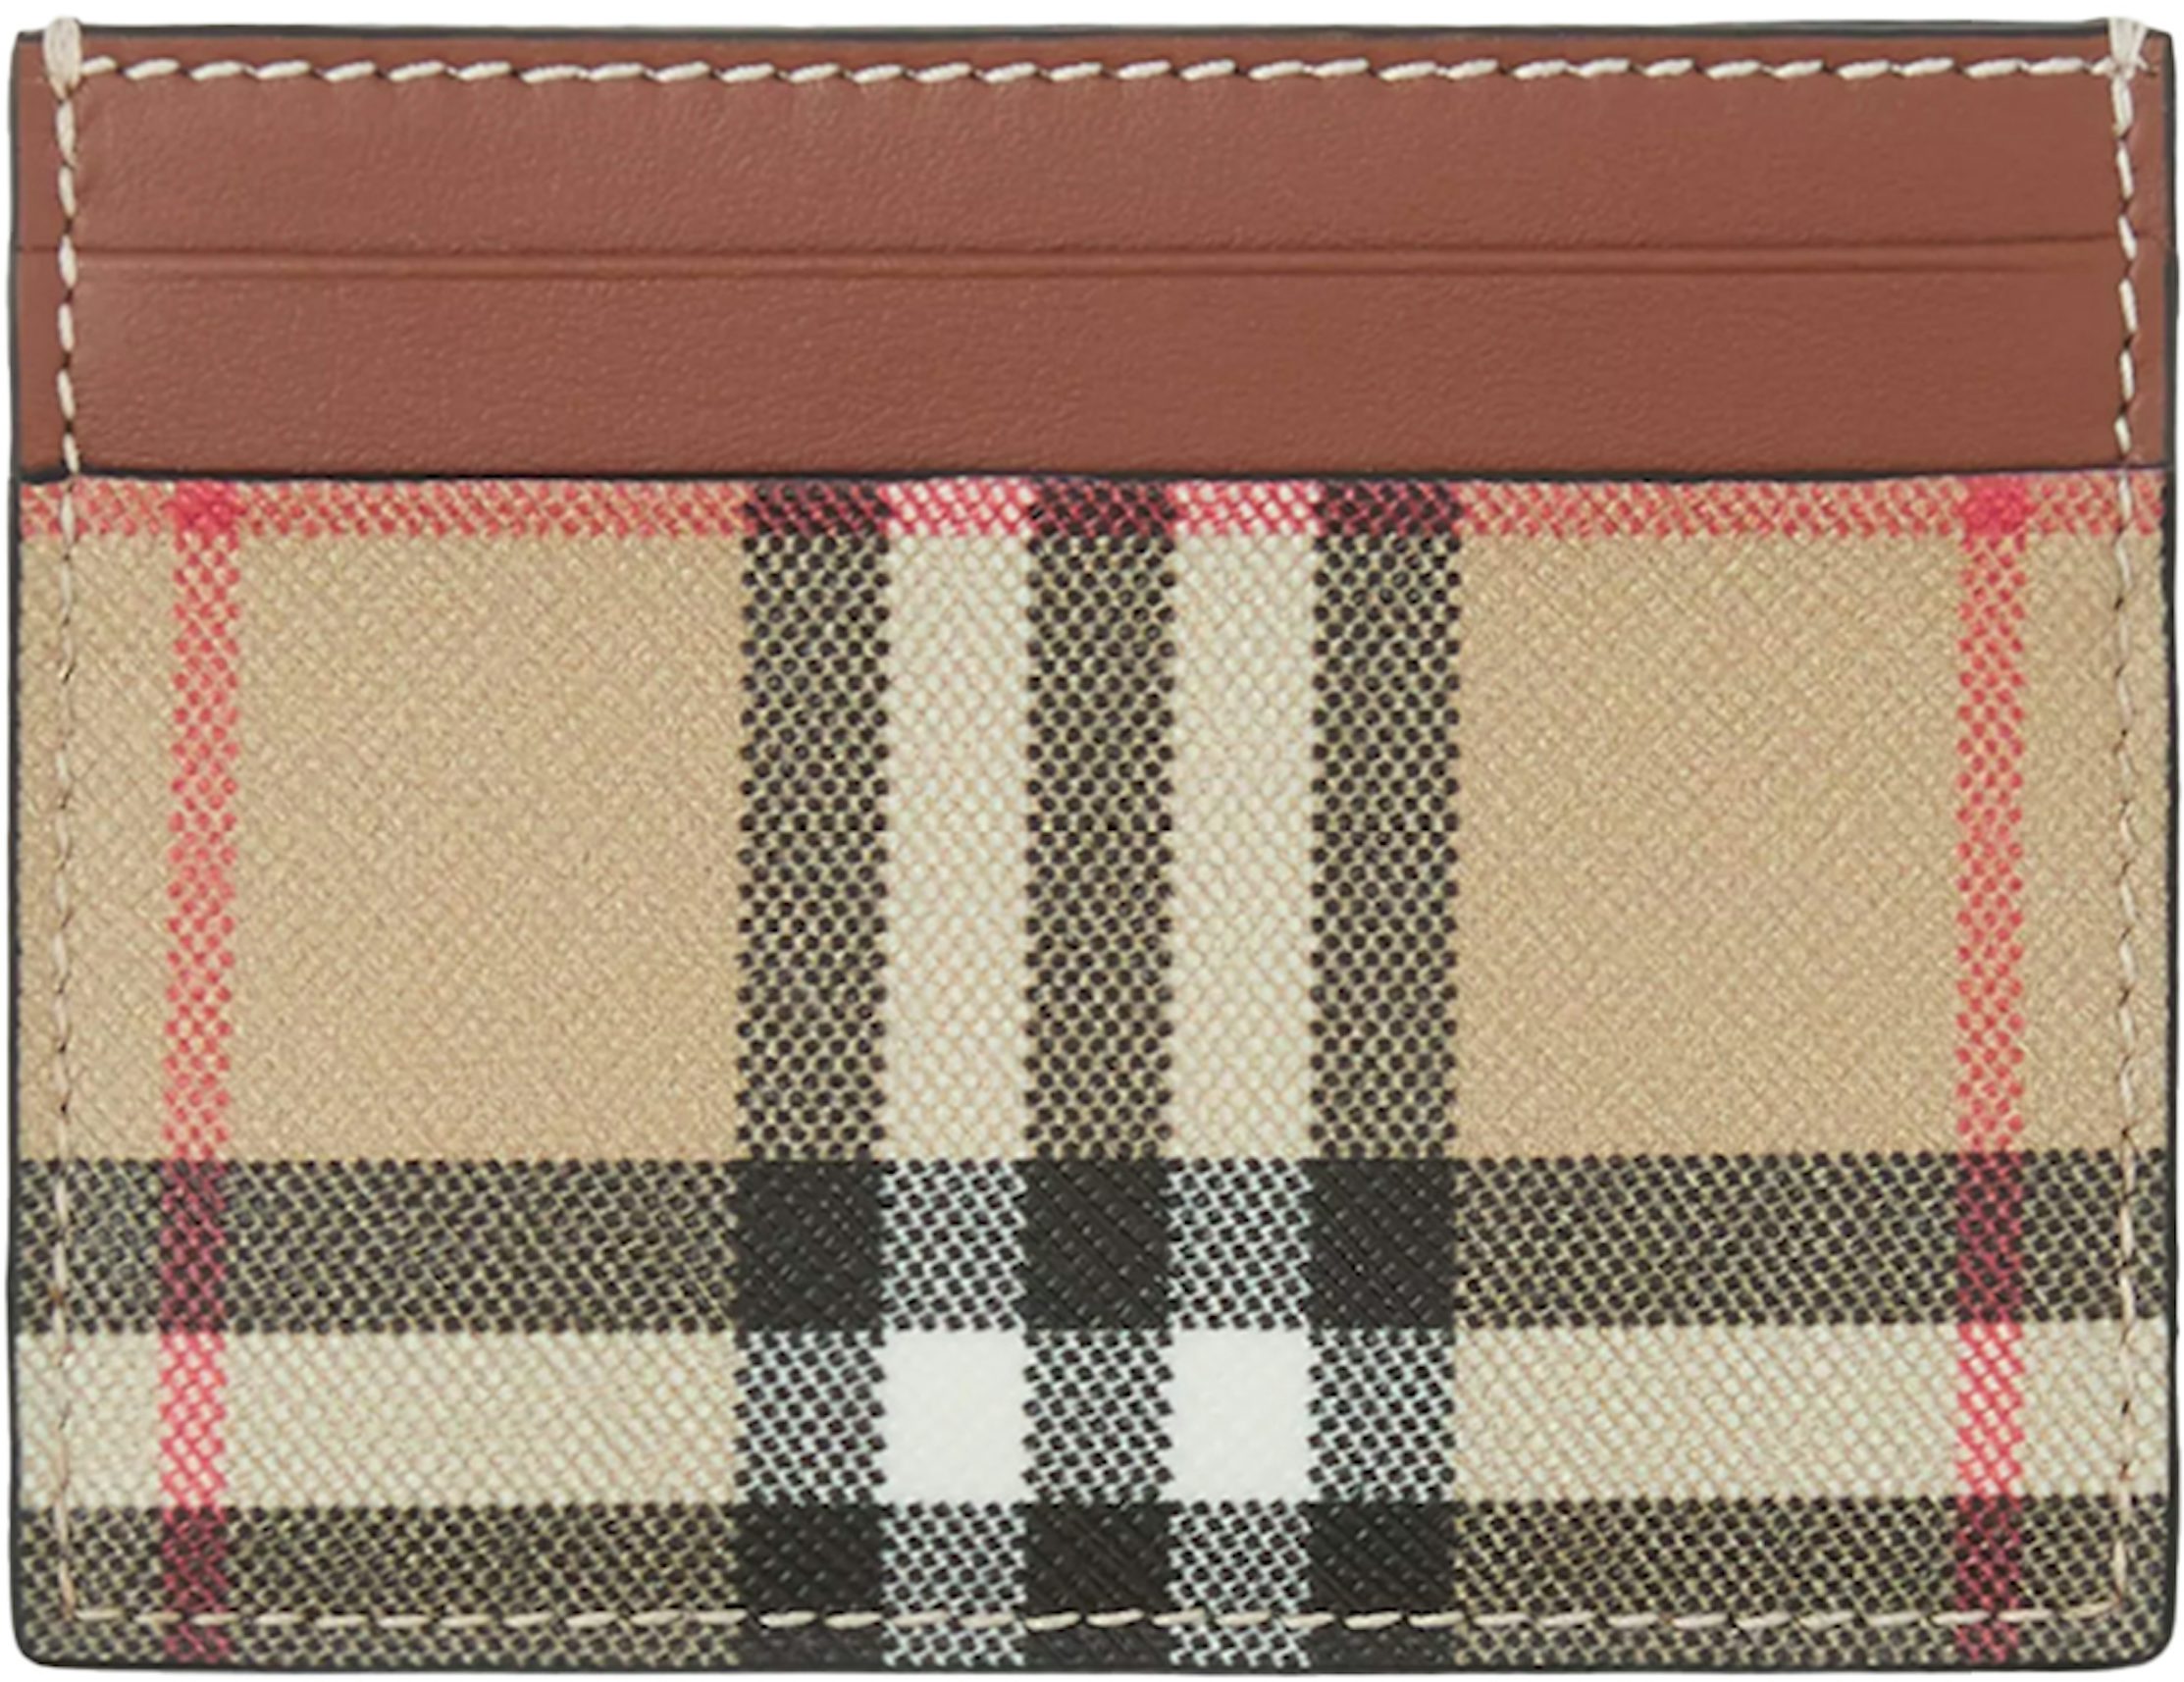 burberry wallet women new Vintage Check & Grainy Leather Folding Wallet